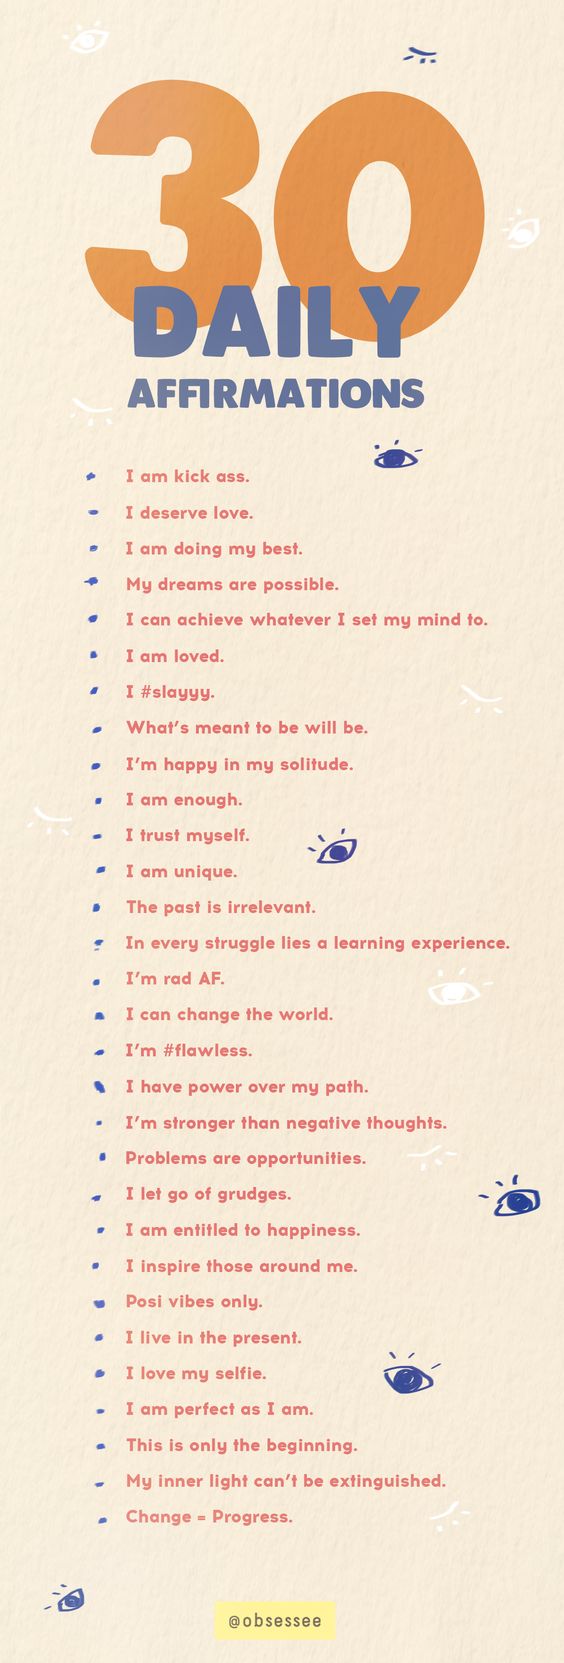 Save these 30 daily affirmations for positive words to remember just how special you are.